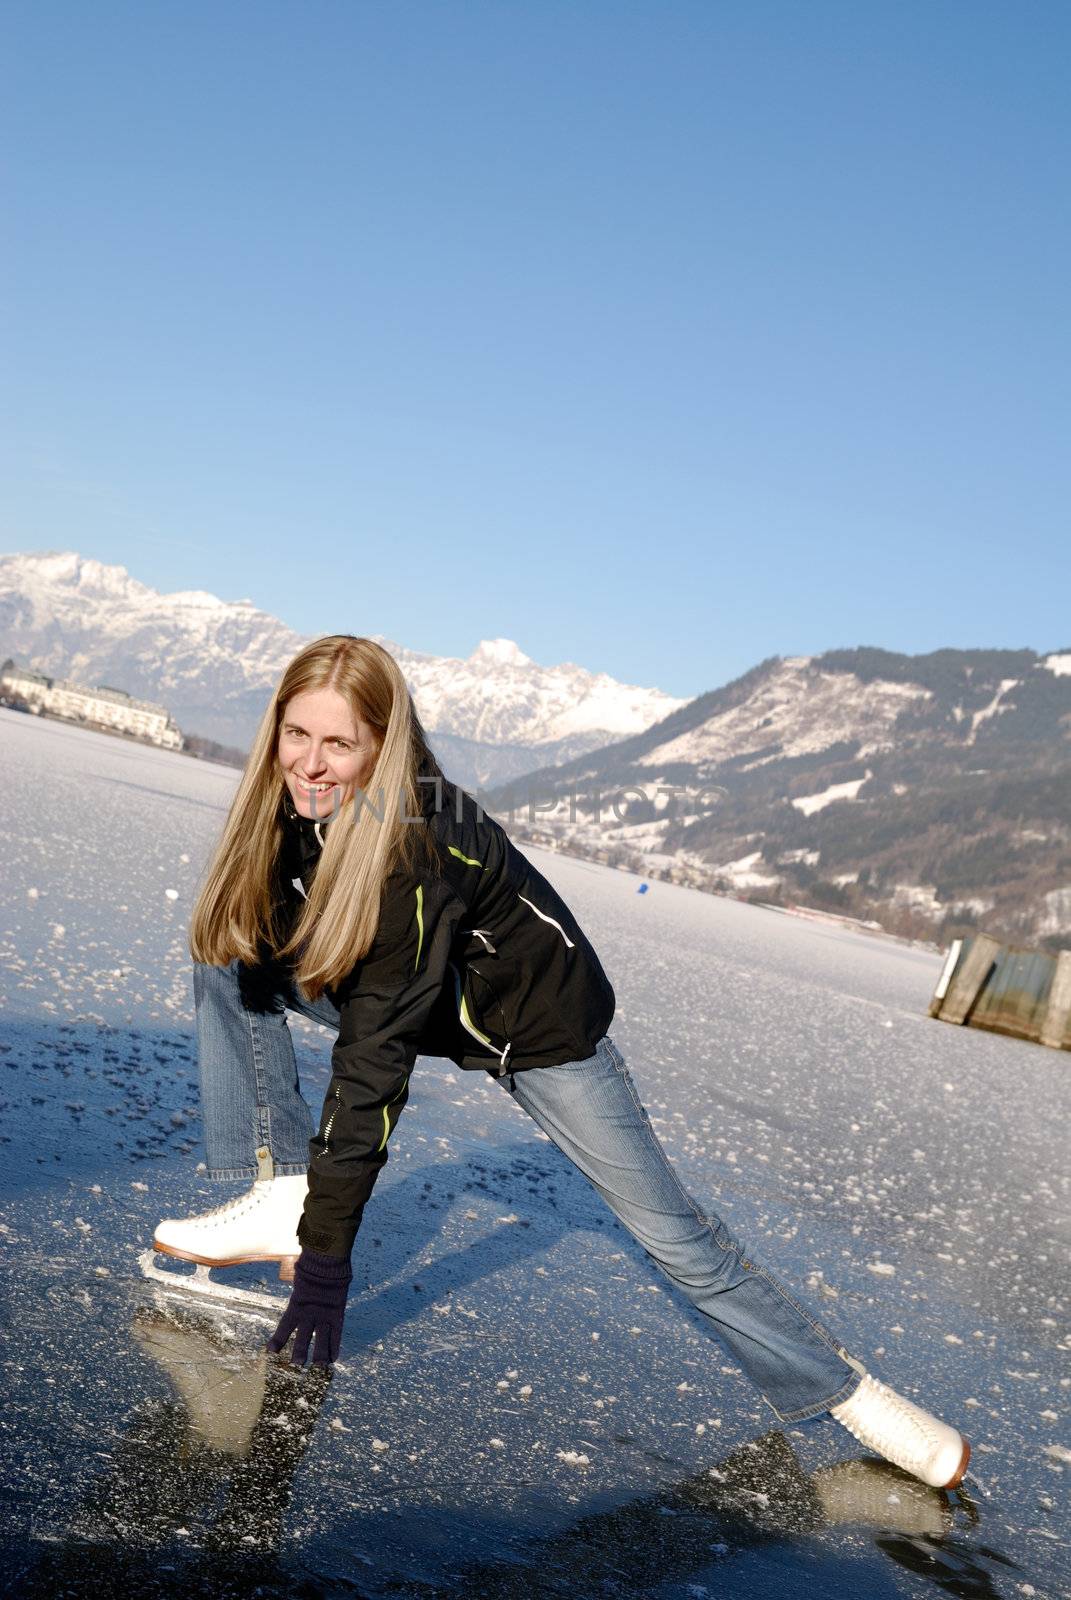 Young woman figure skating at frozen lake of zell am see in austria